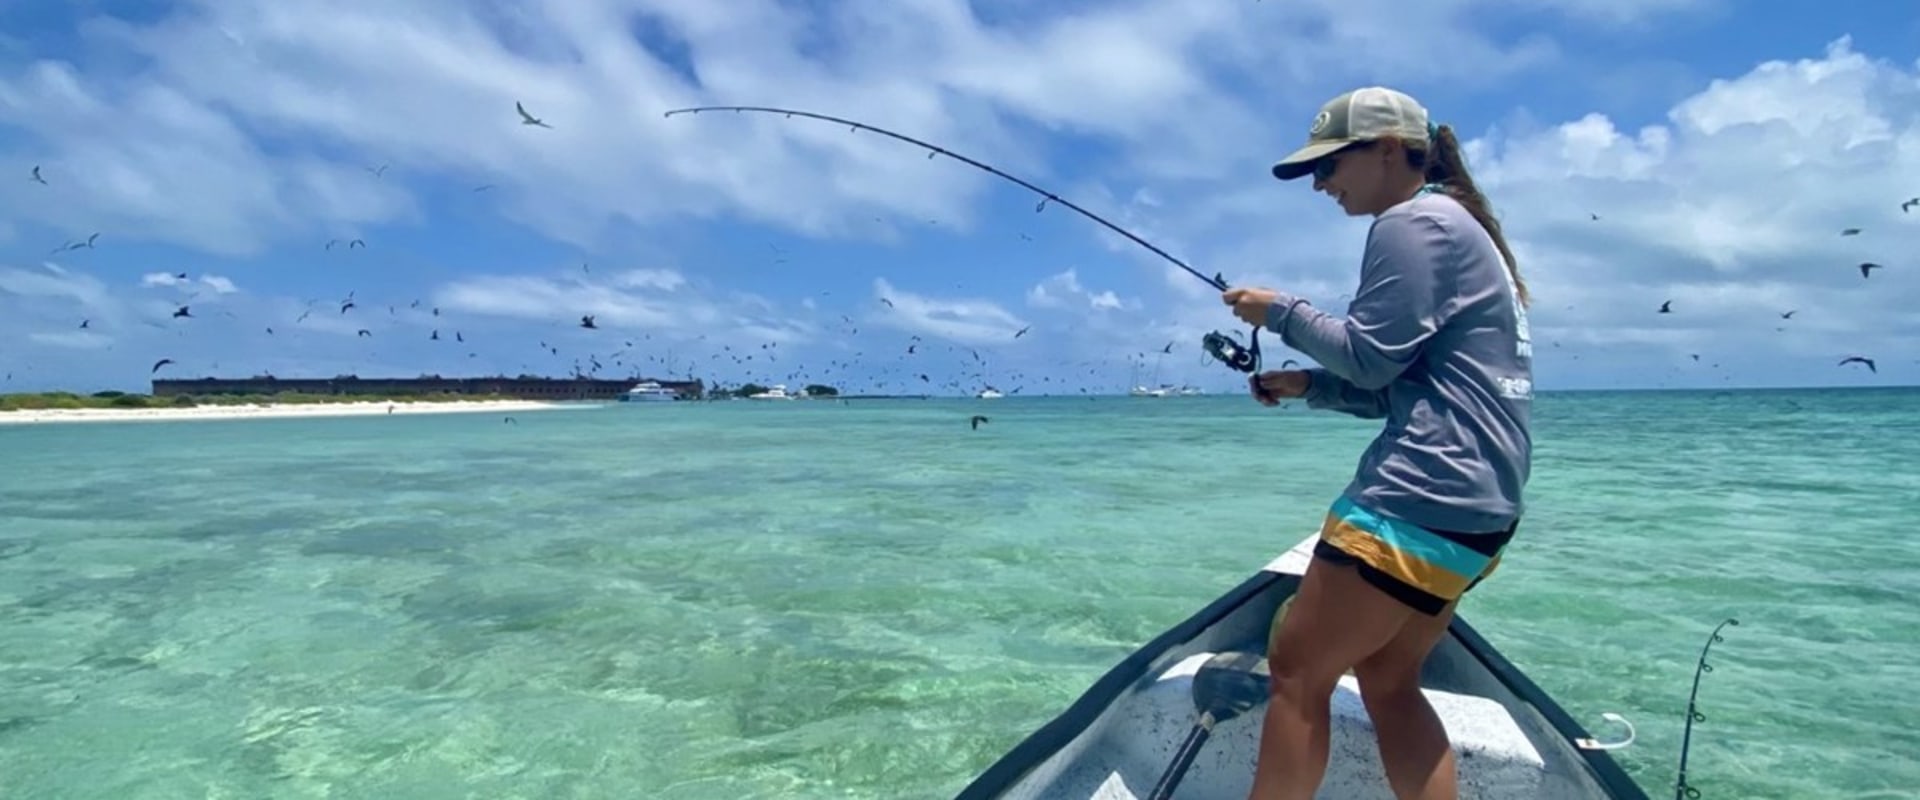 Saltwater Fishing: Regulations, Limits, and Best Practices